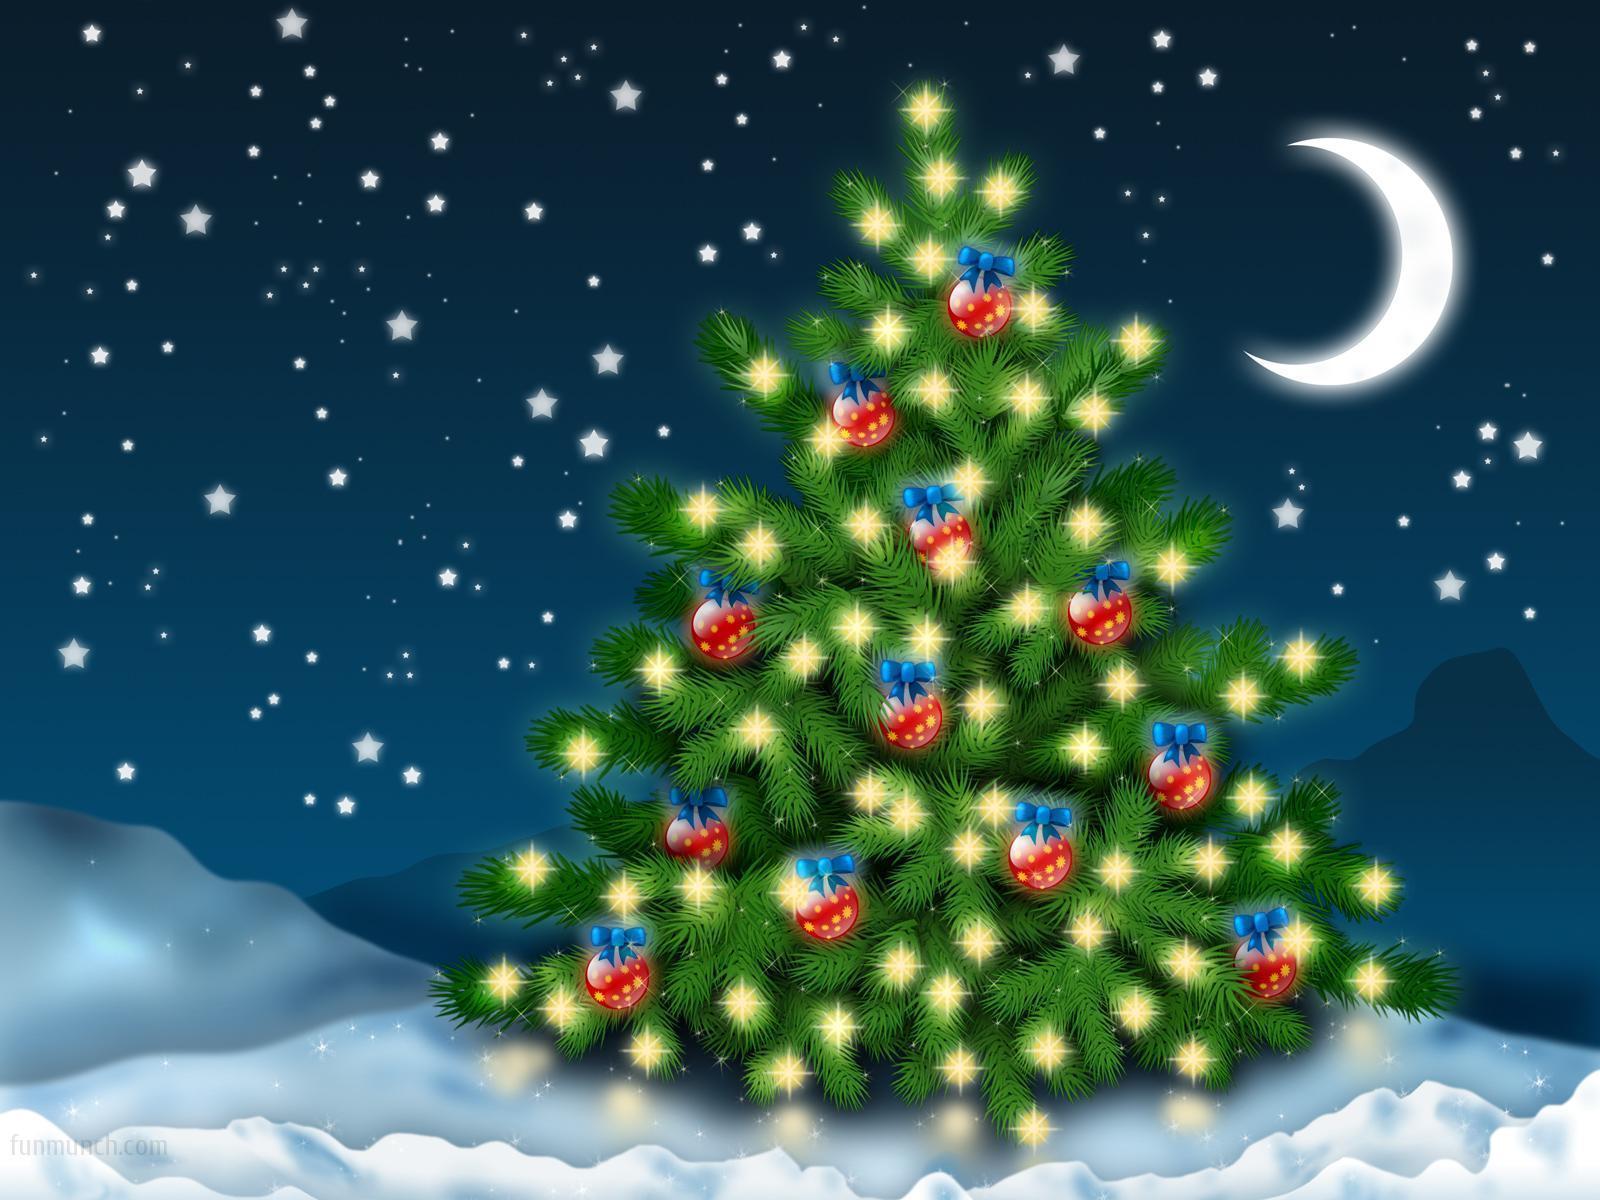 Bright Christmas Wallpaper Free Bright Christmas Background